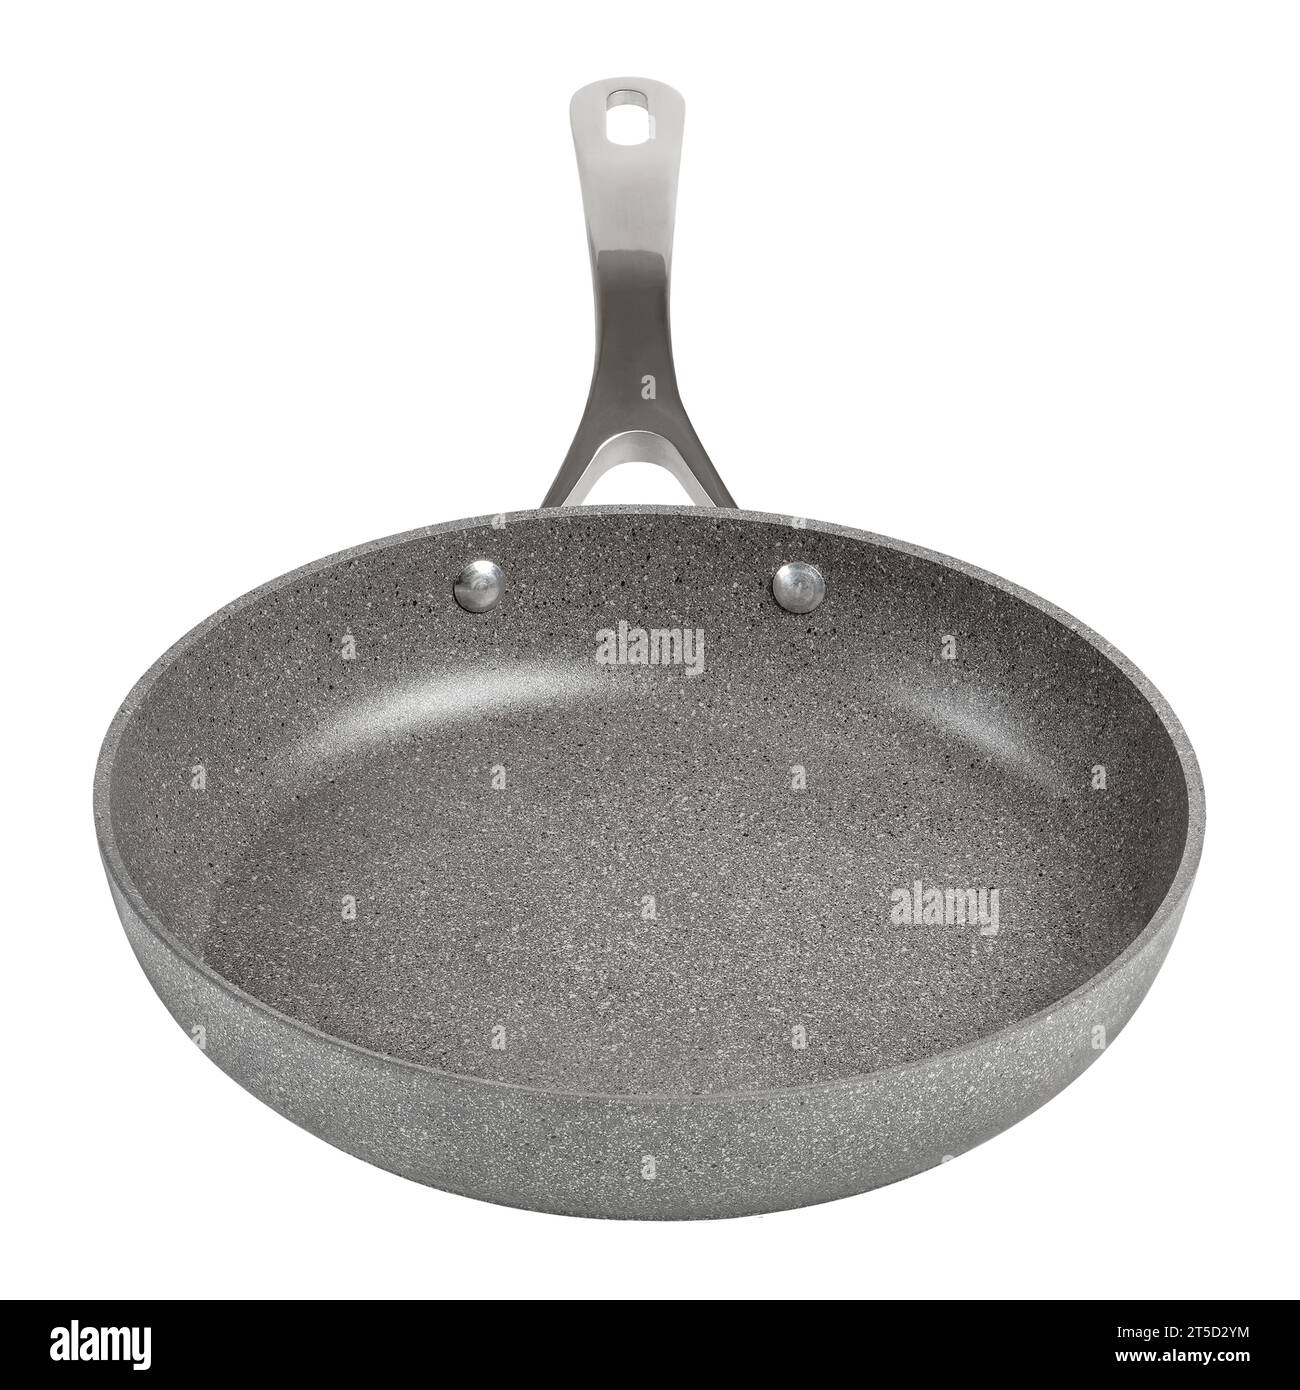 https://c8.alamy.com/comp/2T5D2YM/frying-pan-with-non-stick-coating-on-a-white-isolated-background-new-gray-frying-pan-clipart-for-inserting-into-a-design-or-project-overlay-for-2T5D2YM.jpg